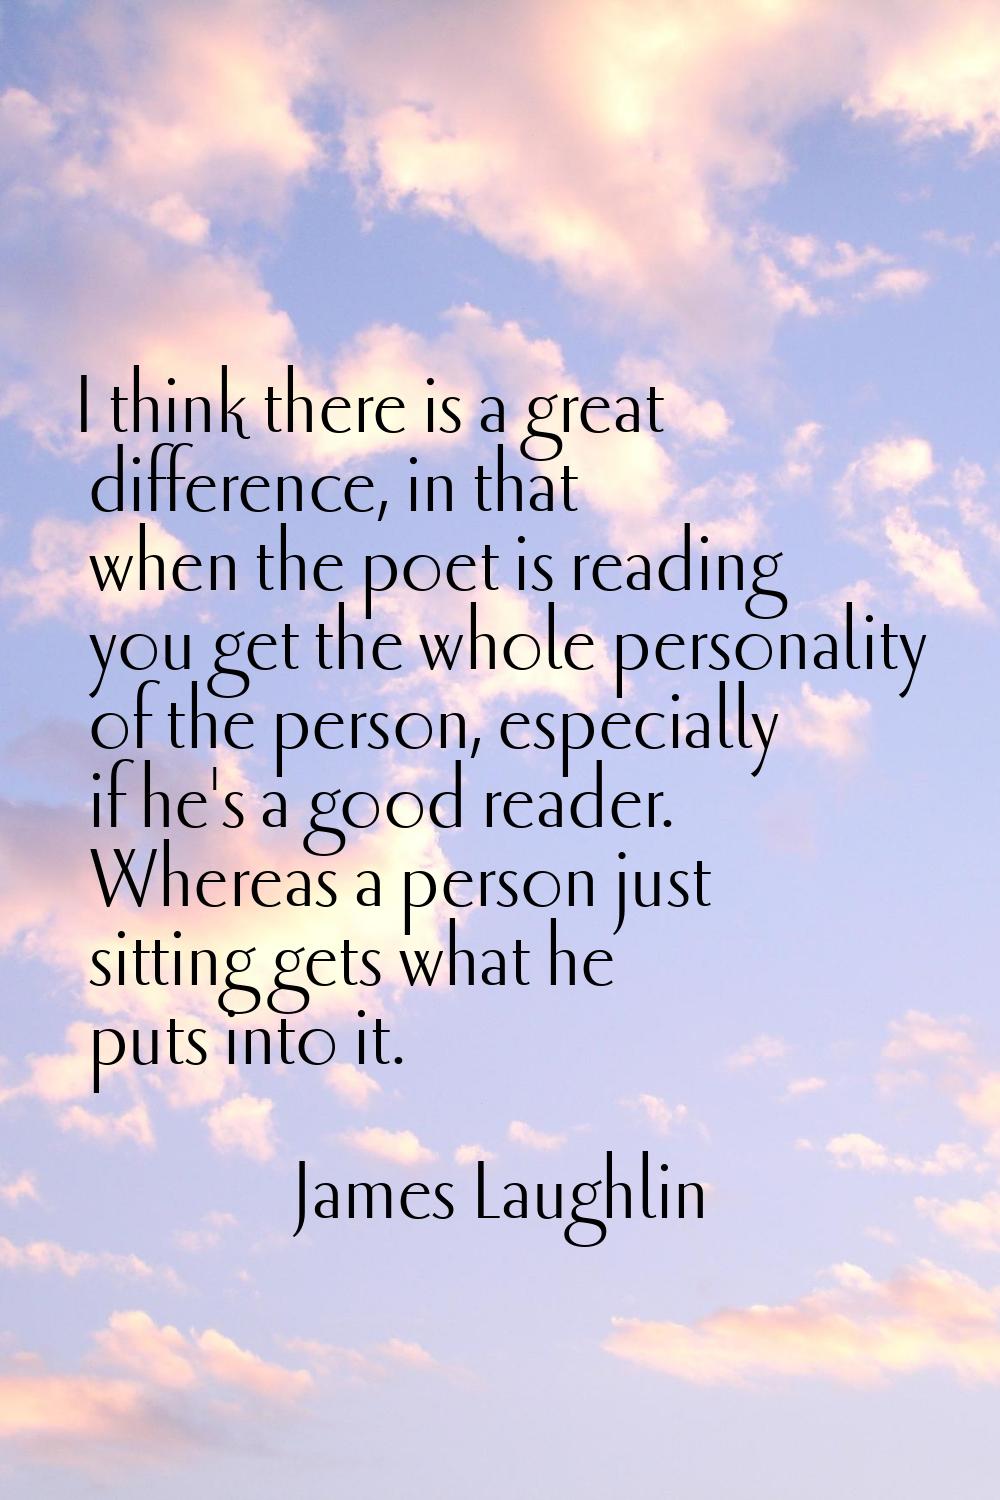 I think there is a great difference, in that when the poet is reading you get the whole personality